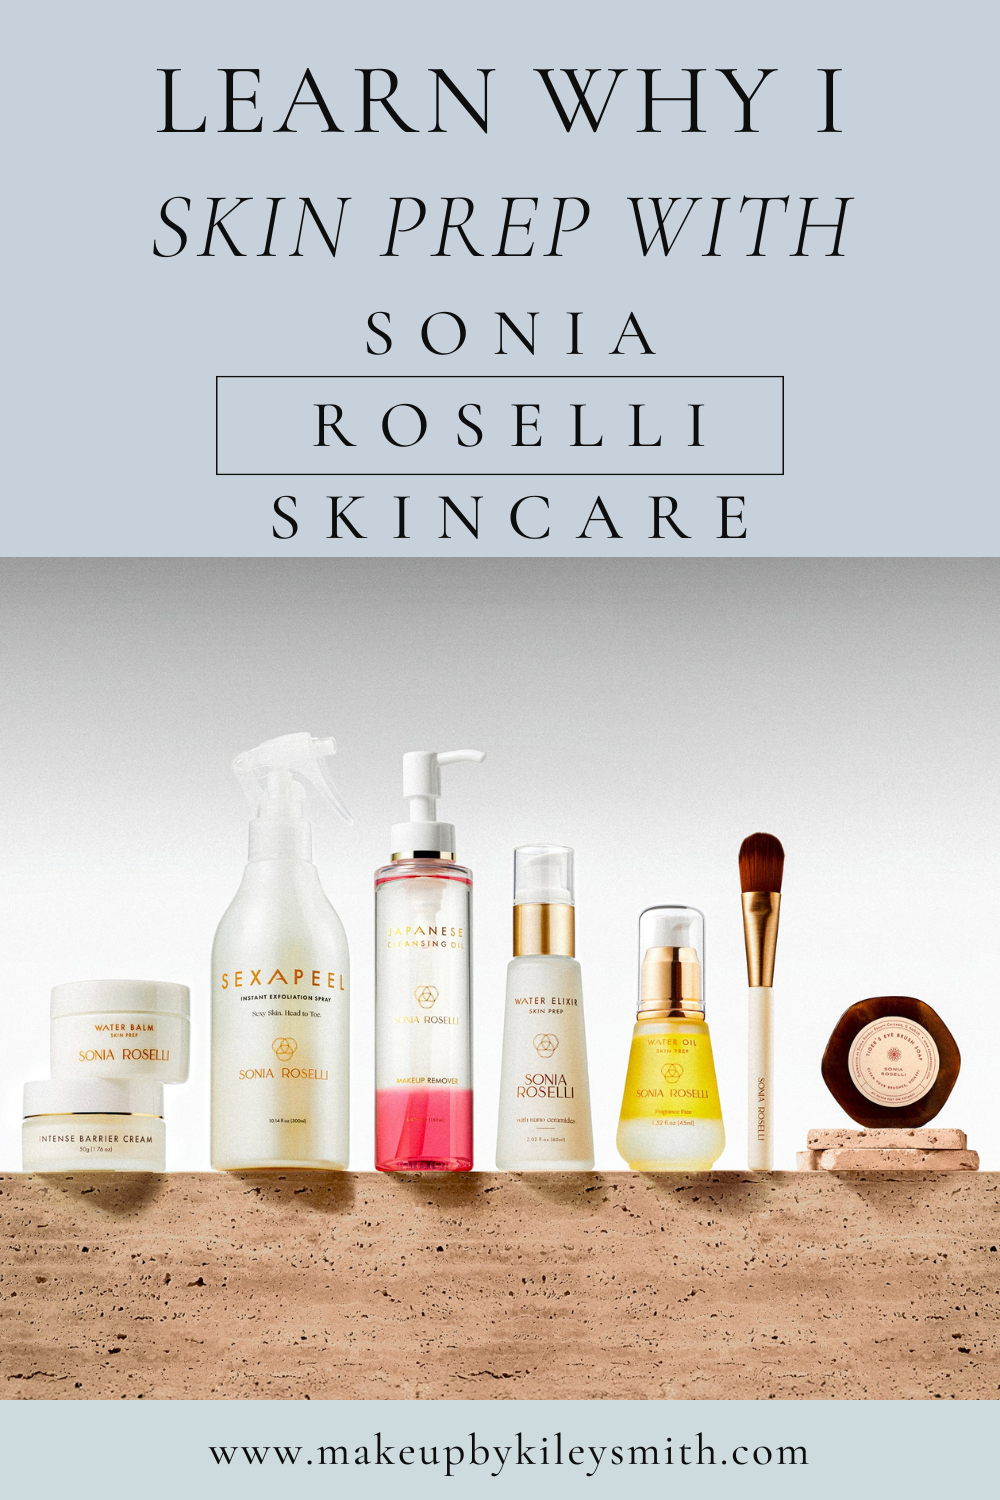 Seven of Sonia Roselli Skincare products are lined up on a wooden shelf.